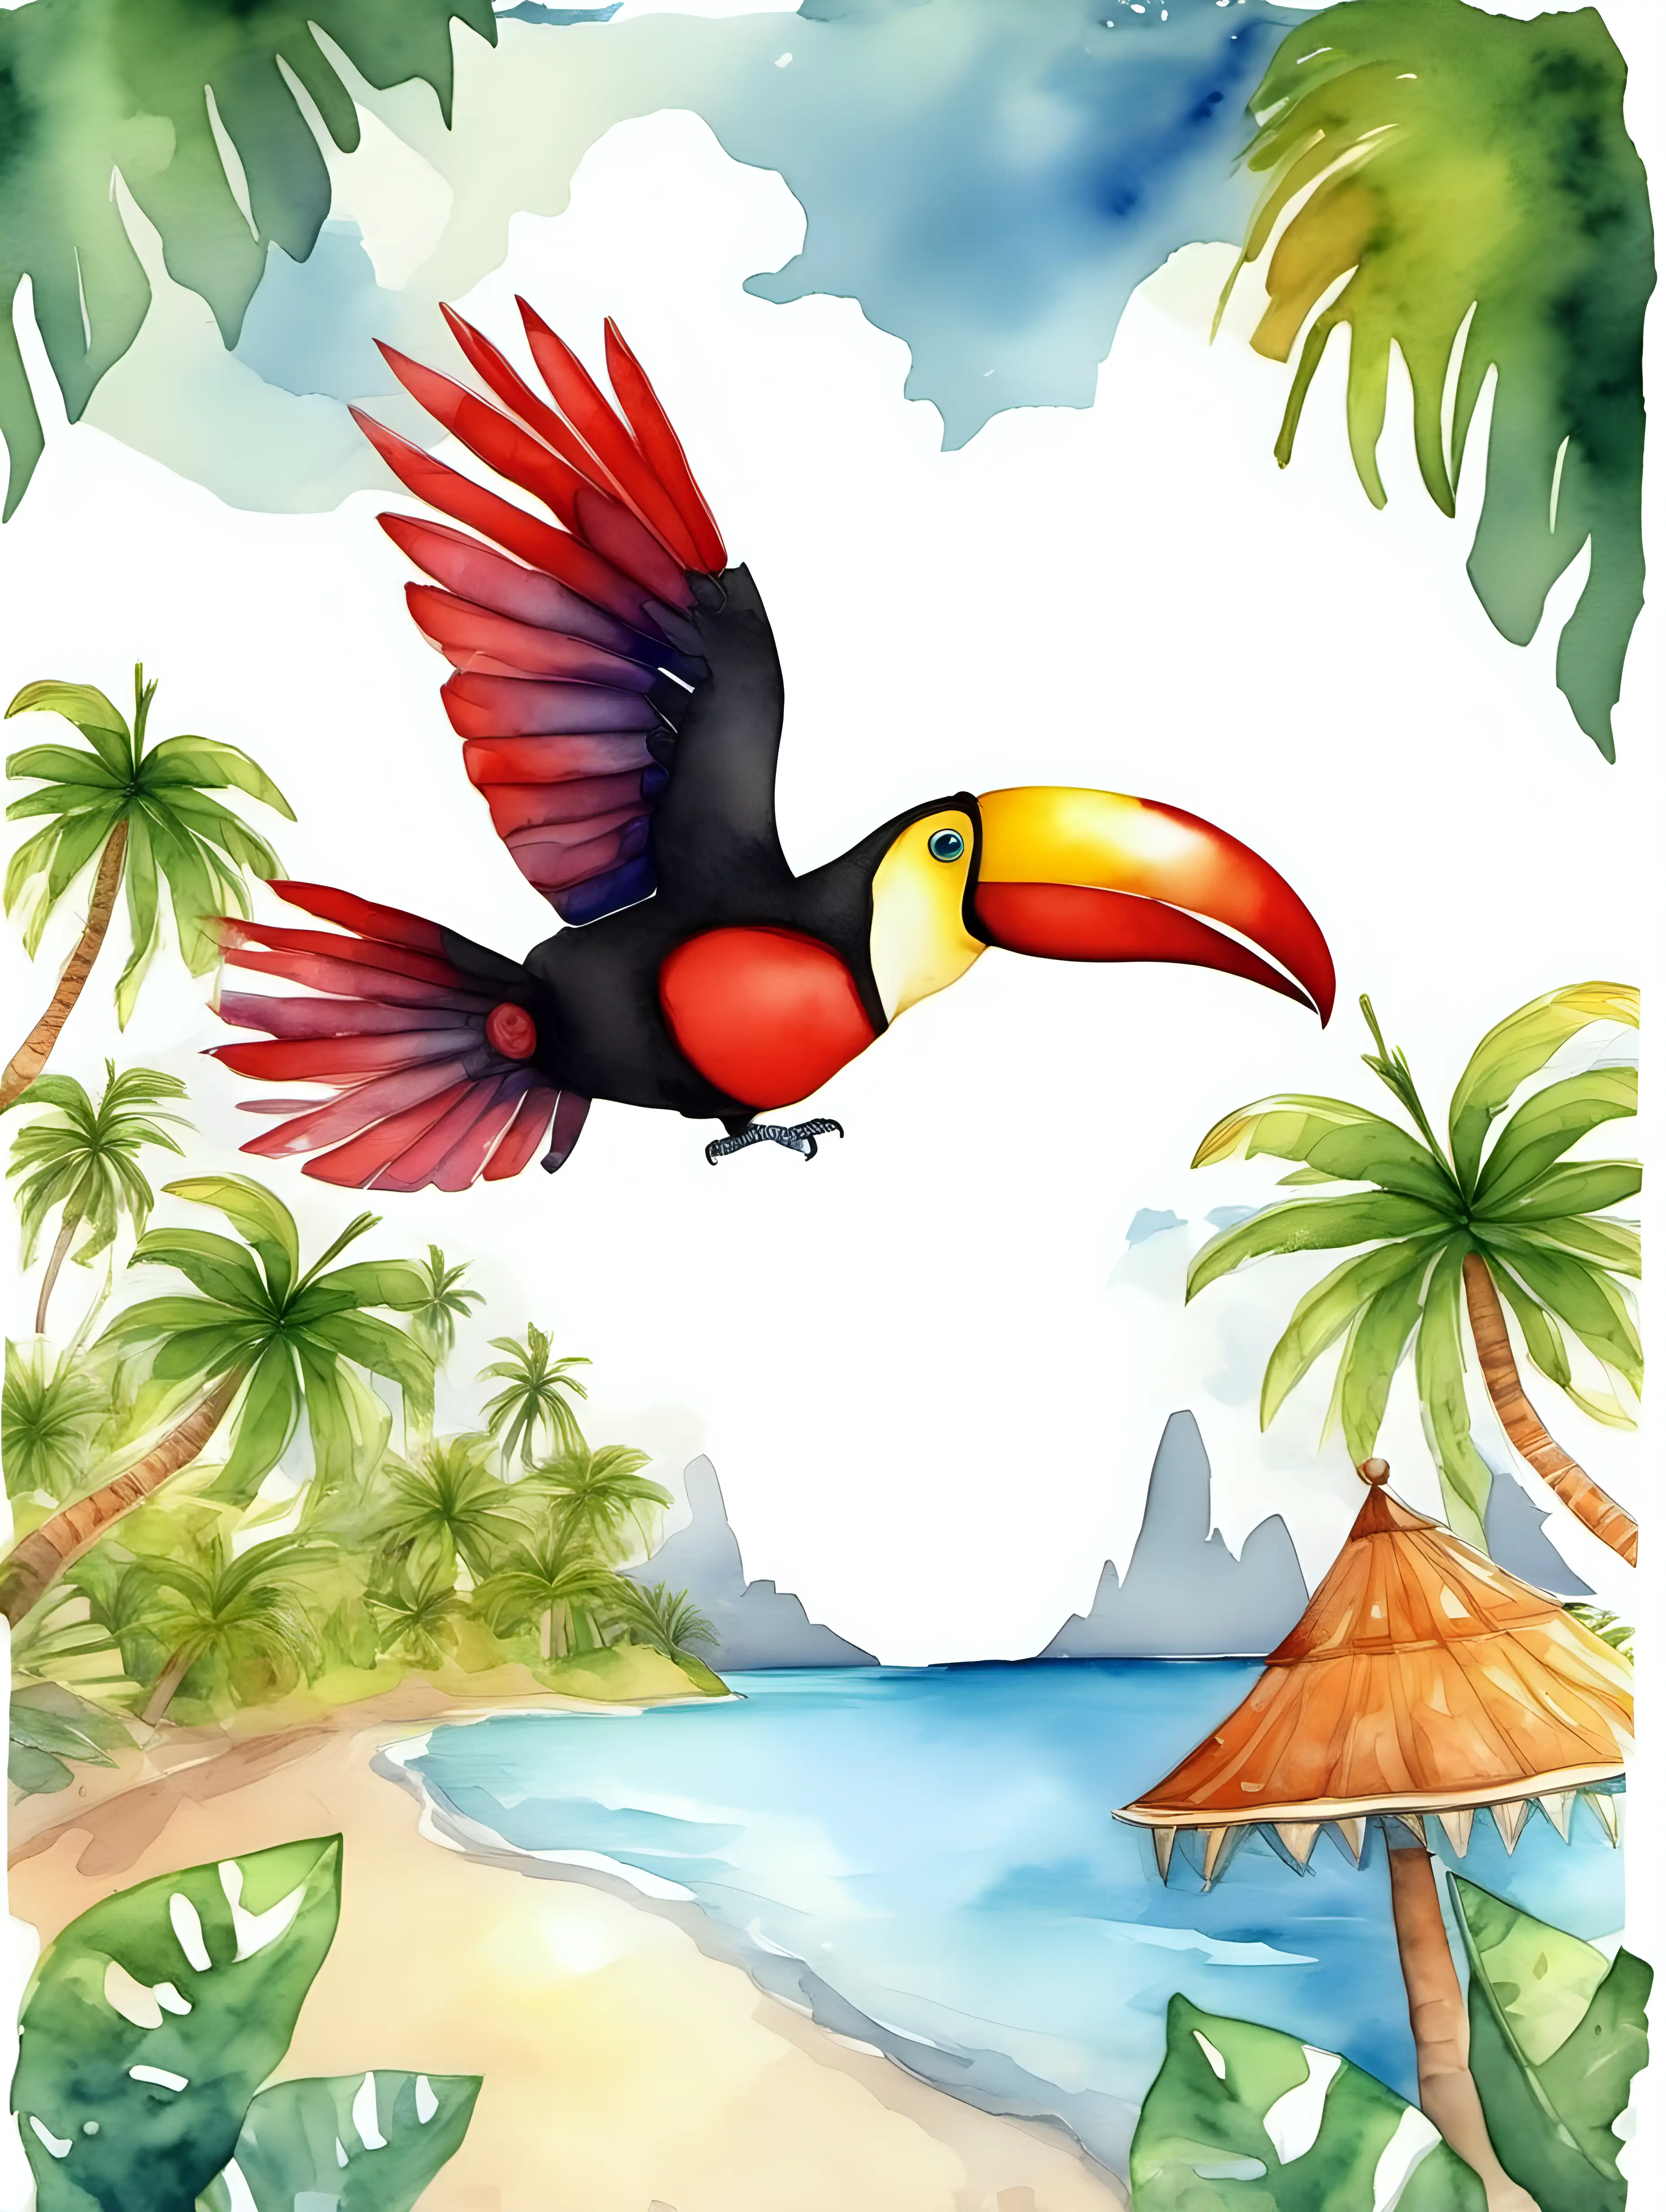 Vibrant Red Toucan Soaring Above Lush Tropical Island in Beautiful Watercolor